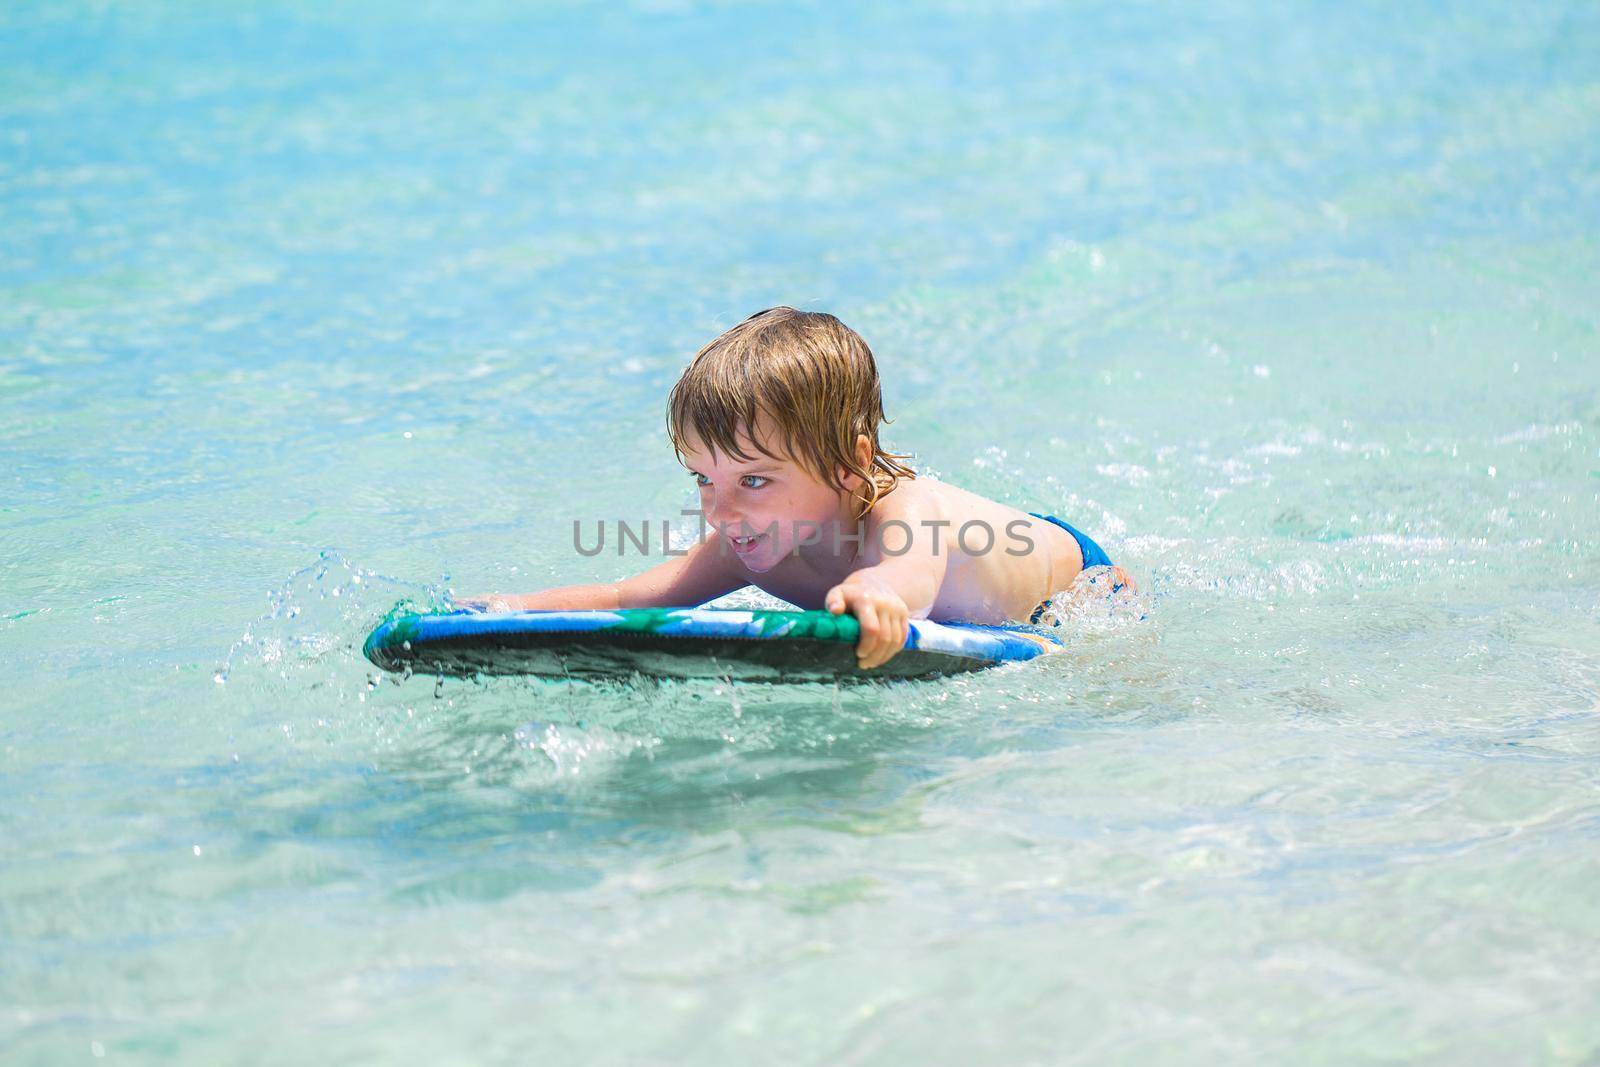 Young surfer, happy young boy in the ocean on surfboard